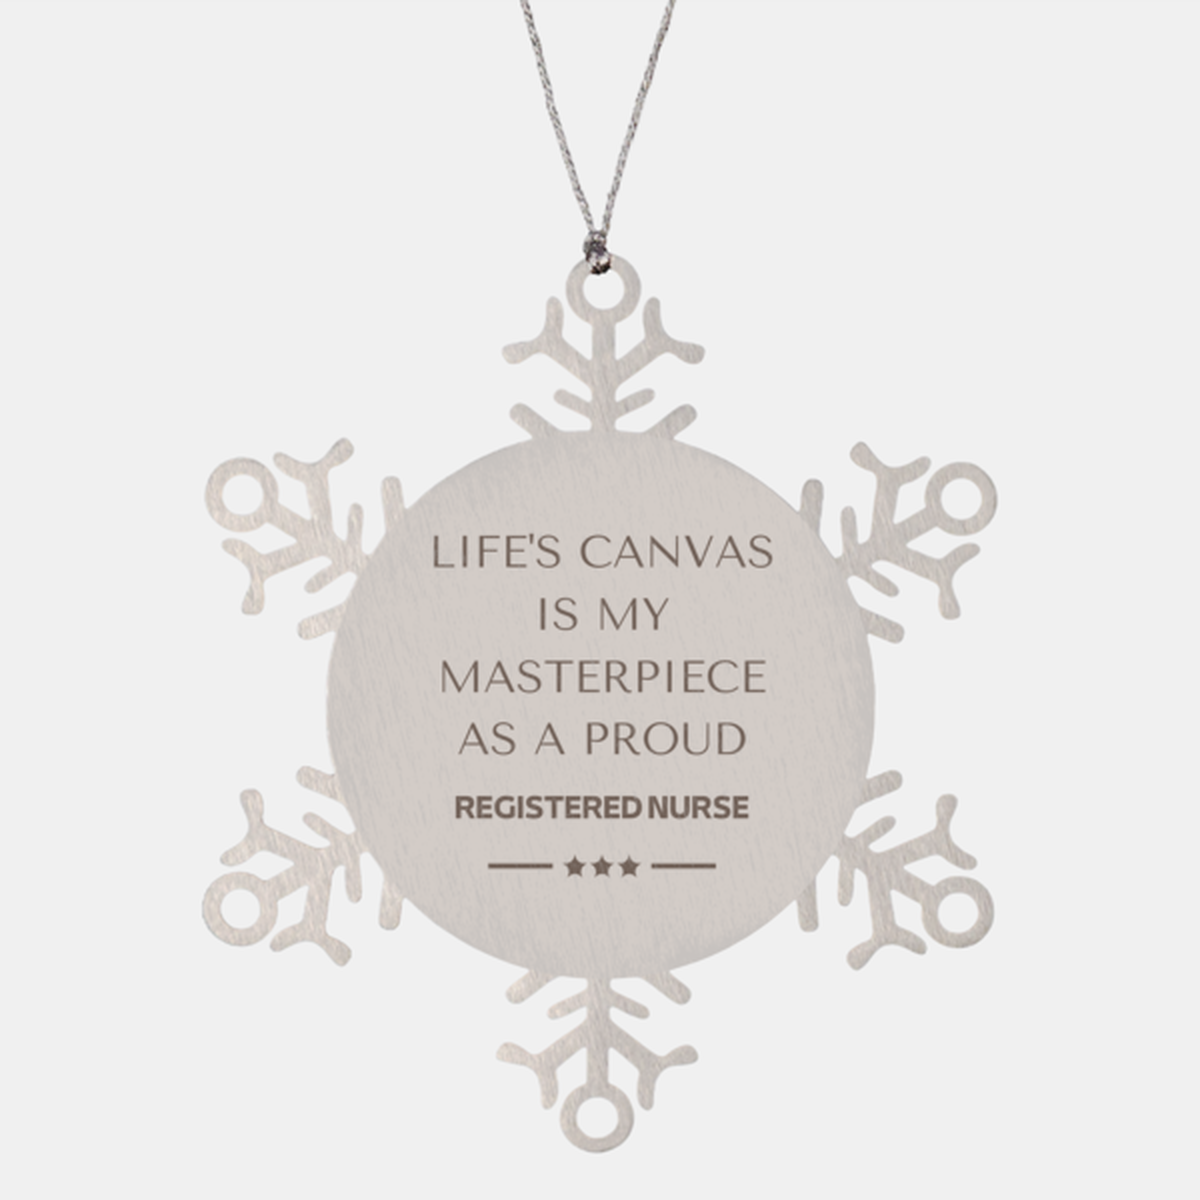 Proud Registered Nurse Gifts, Life's canvas is my masterpiece, Epic Birthday Christmas Unique Snowflake Ornament For Registered Nurse, Coworkers, Men, Women, Friends